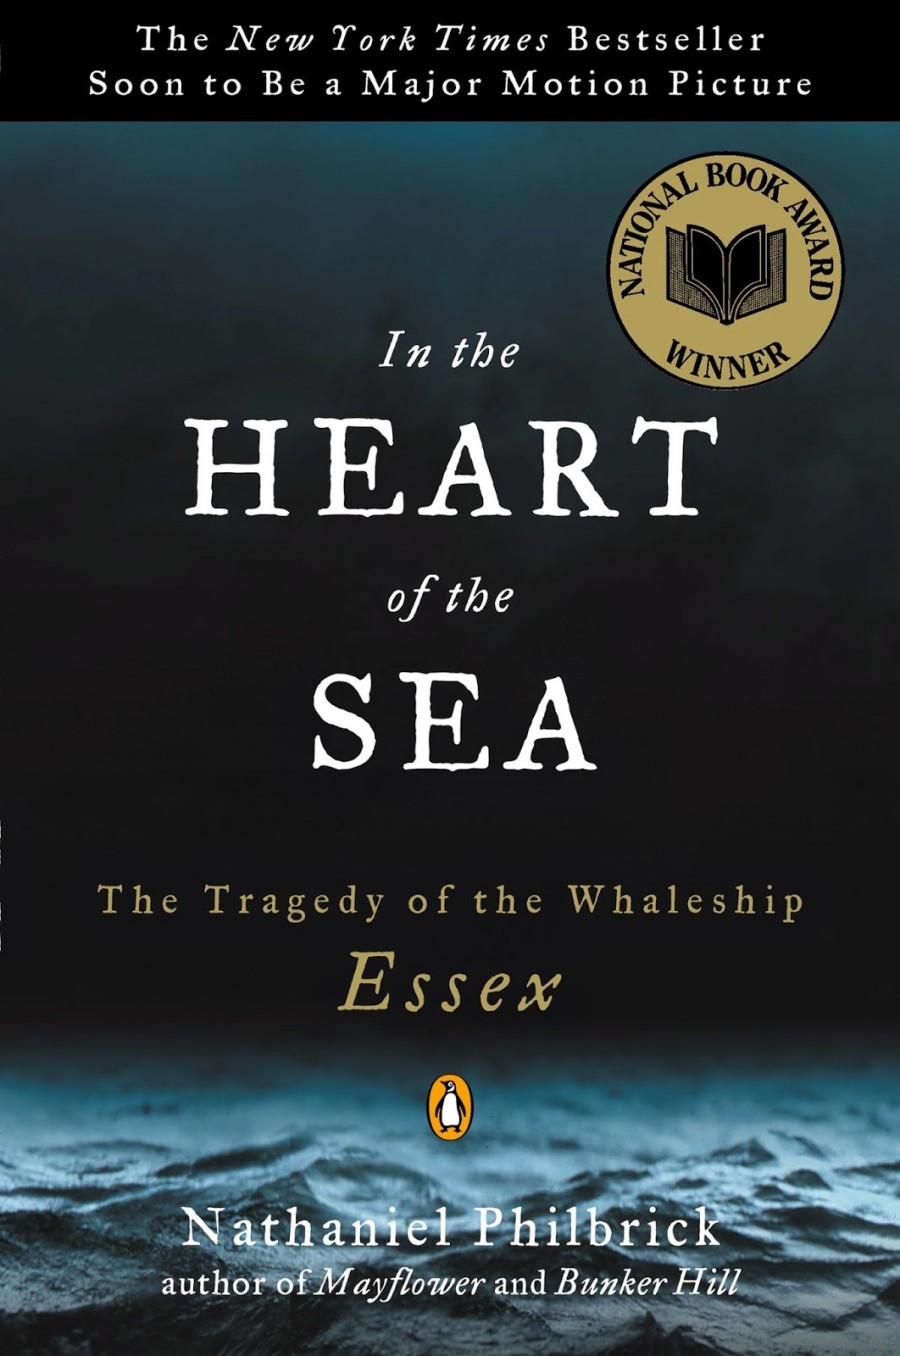 Geek insider, geekinsider, geekinsider. Com,, adaptive reasoning: 'in the heart of the sea', comics, entertainment